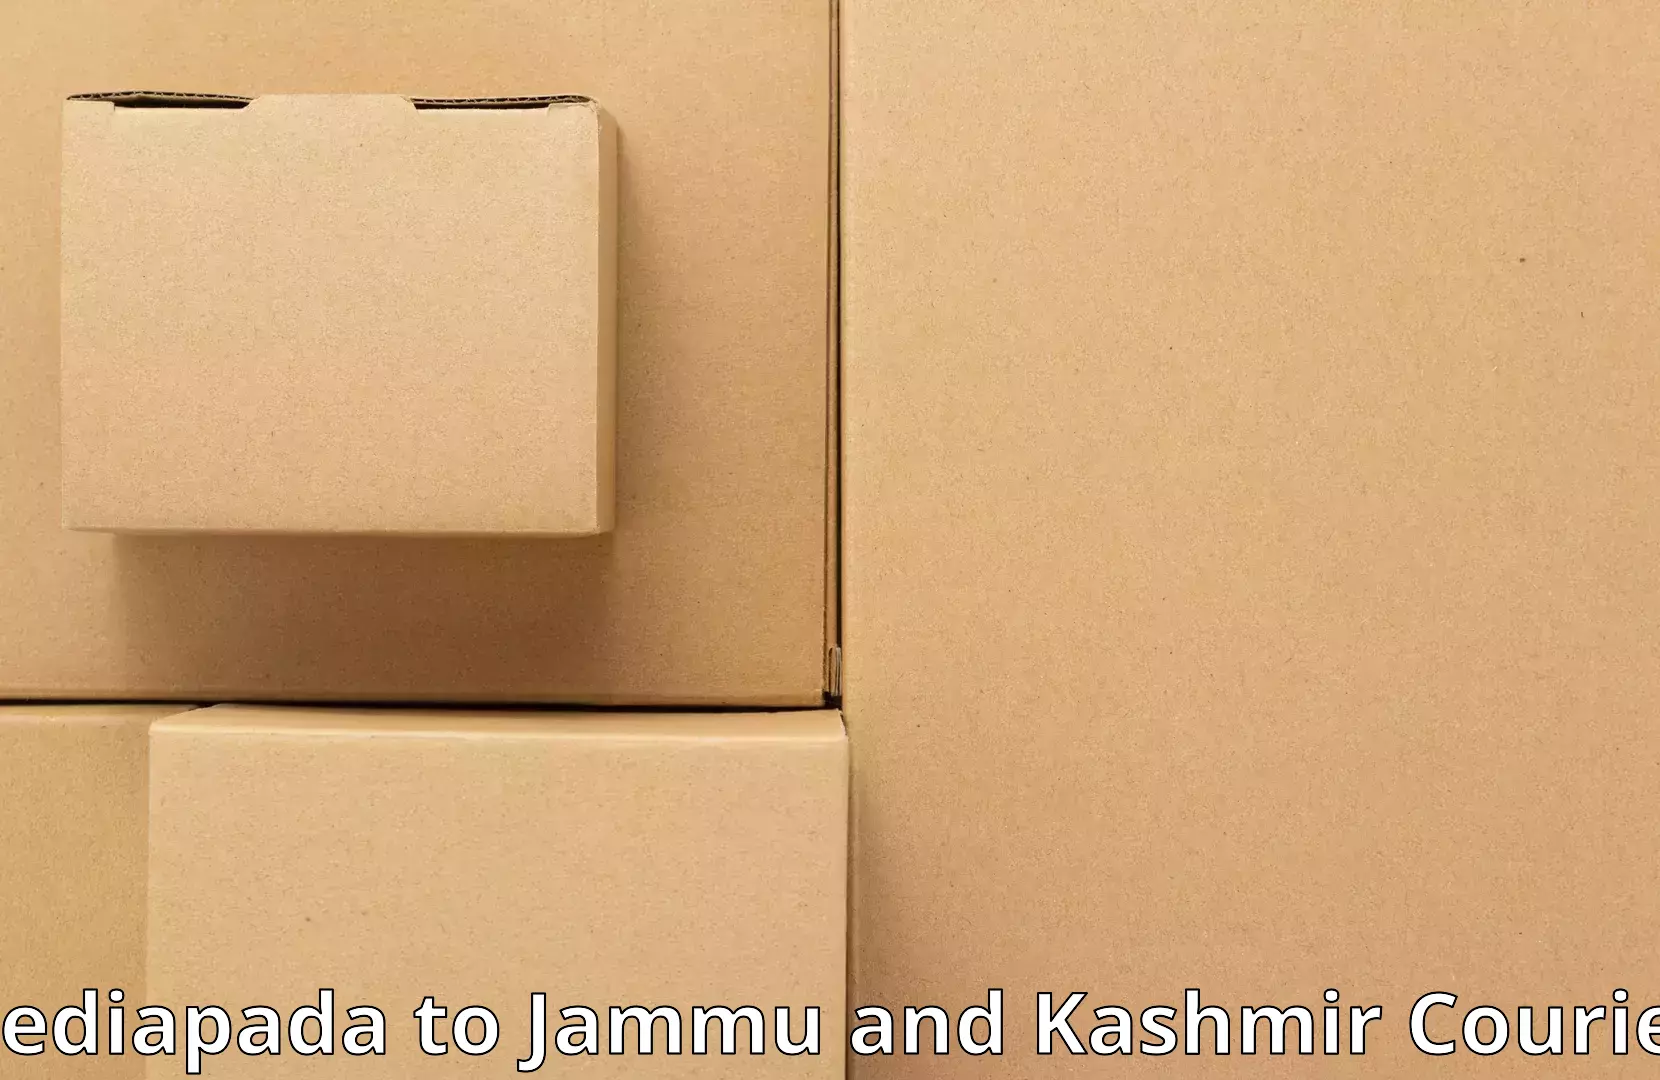 Moving and packing experts Dediapada to Jammu and Kashmir